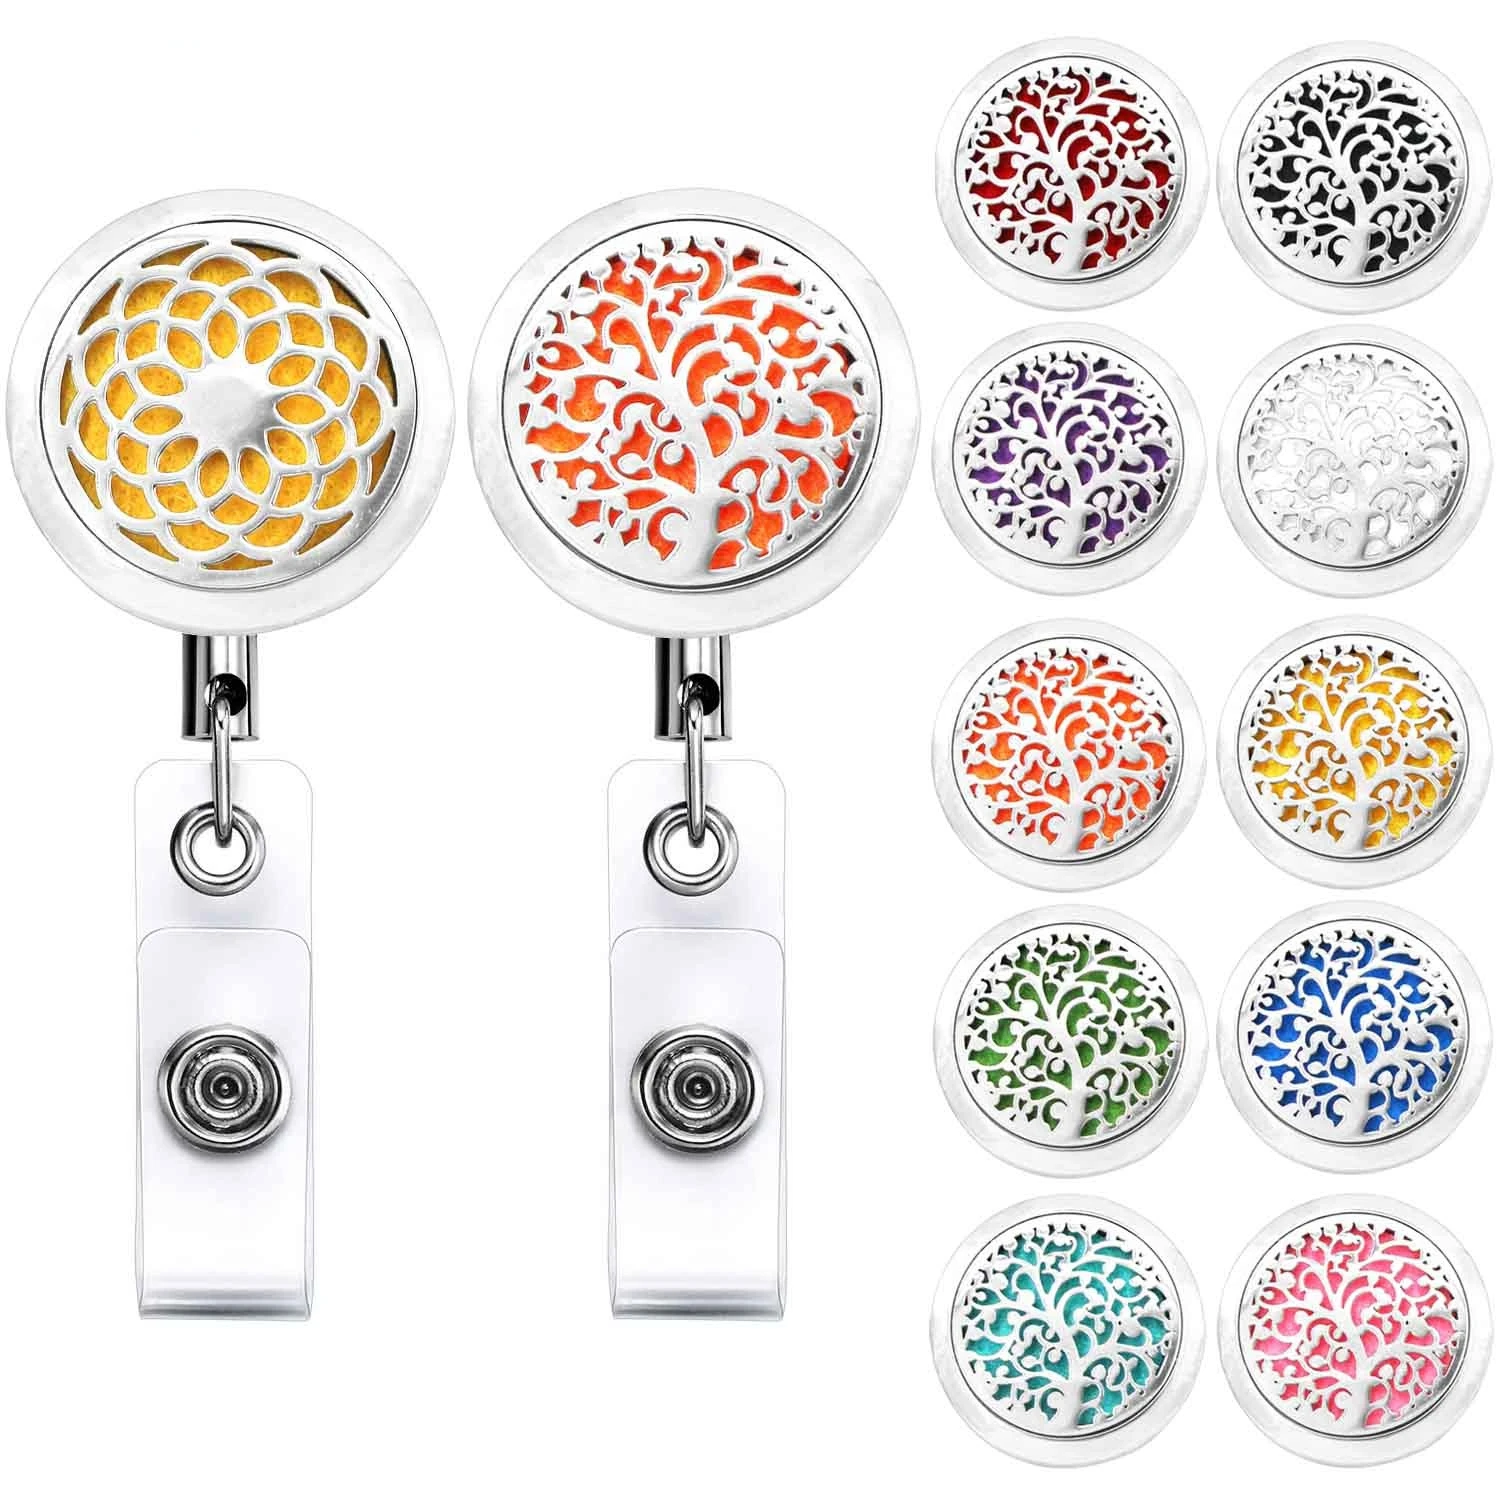 2 Sets Retractable Badge Reel Holder with Alligator Clip Essential Oil Diffuser for Aromatherapy Nurse Doctor Teacher